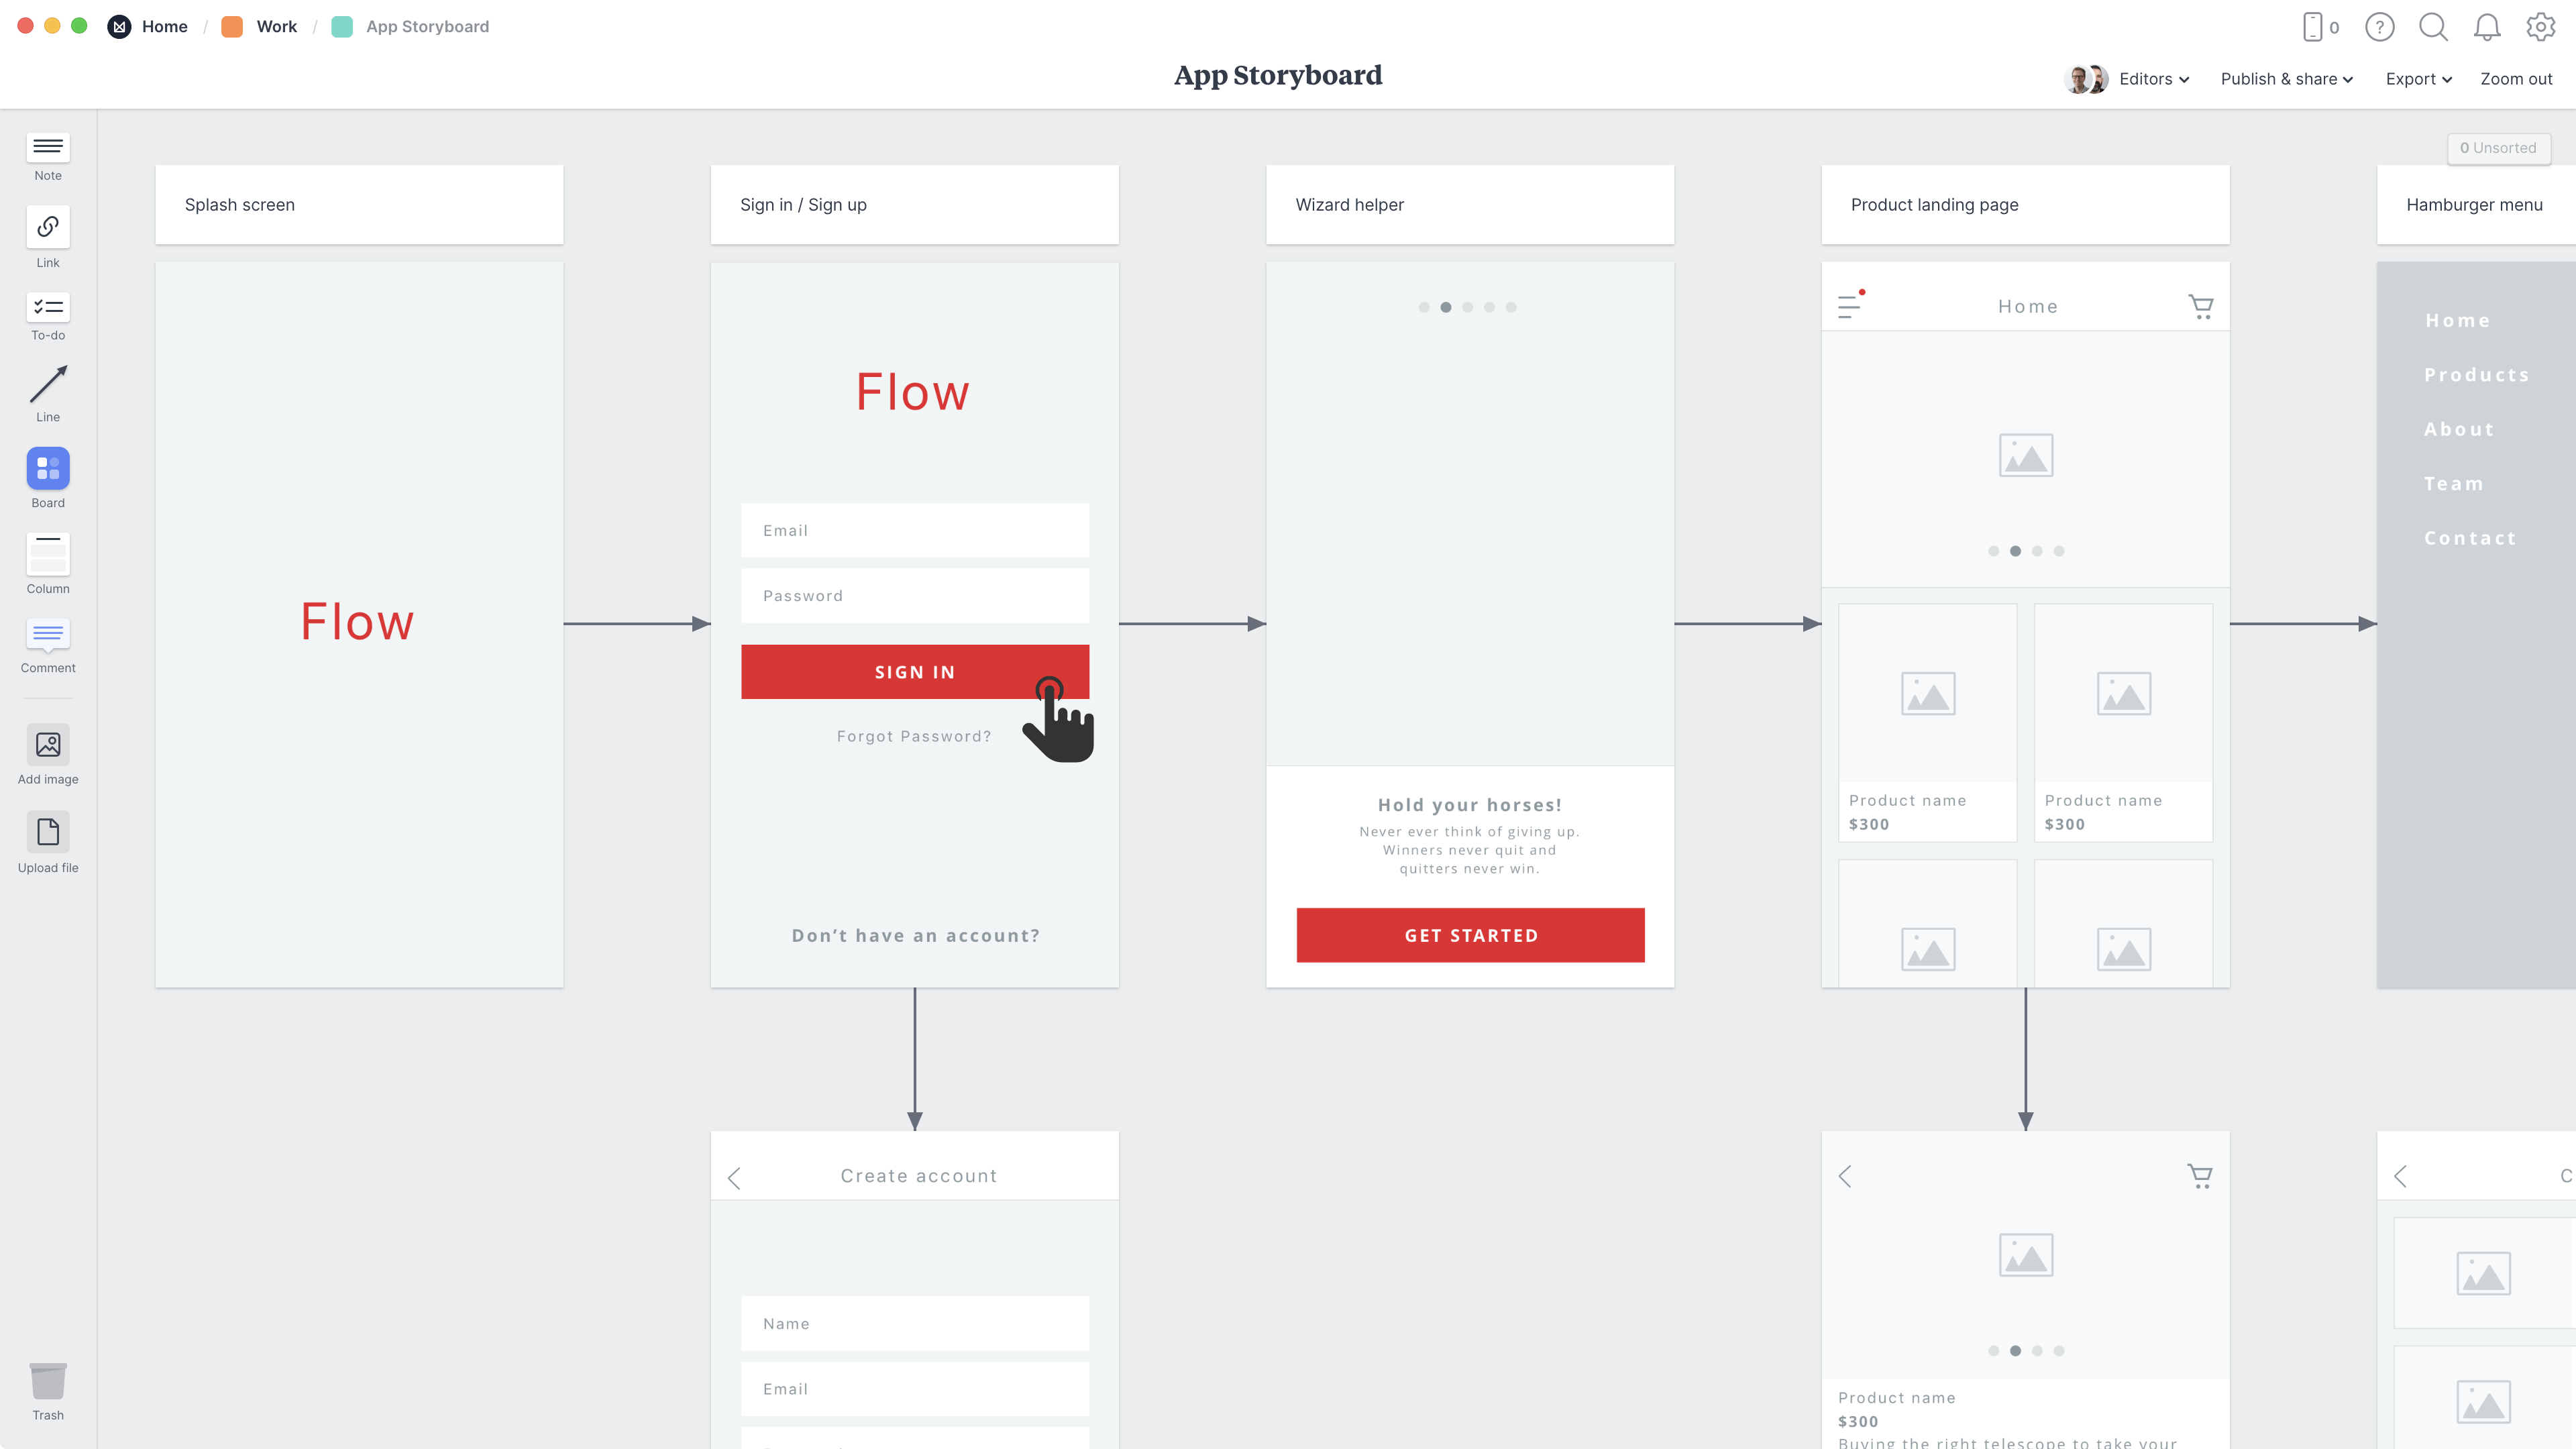 App Storyboard Template, within the Milanote app